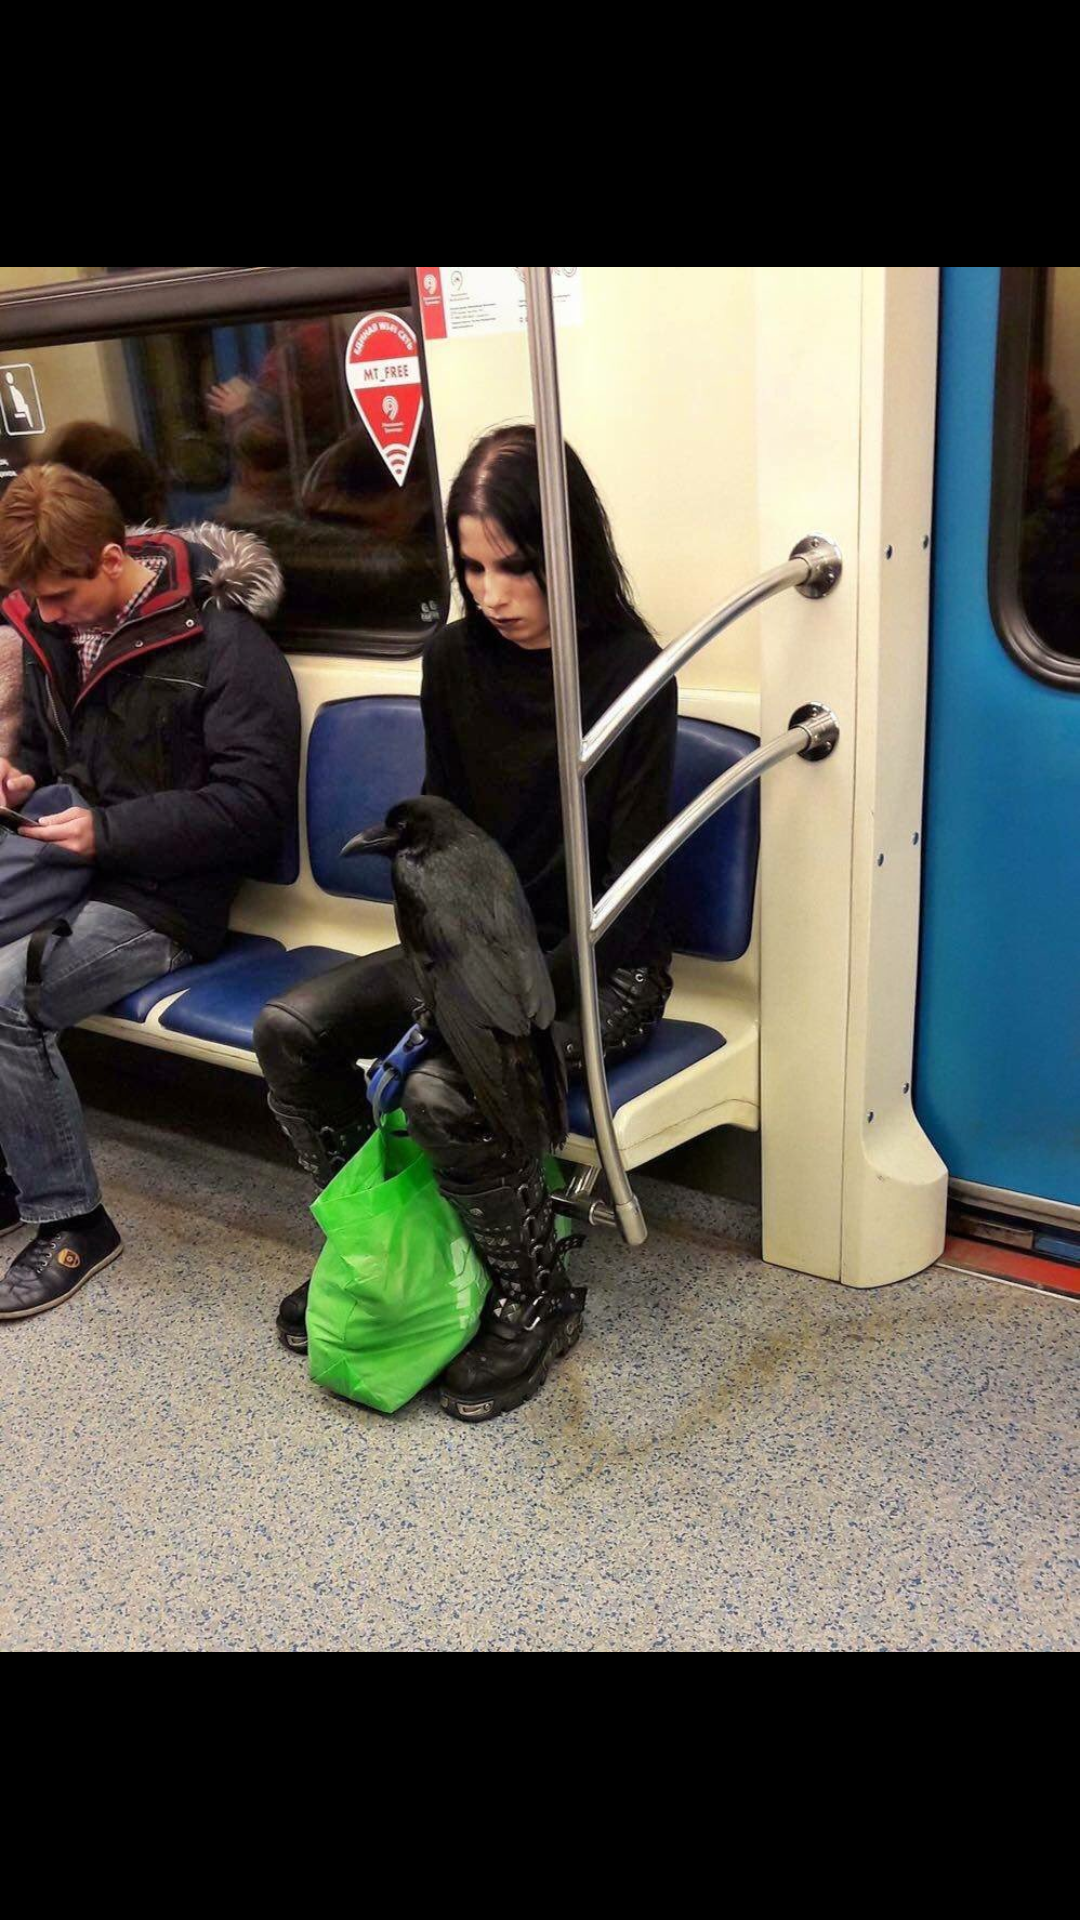 Sure, you're goth, but are you dejectedly riding the subway with your raven goth?